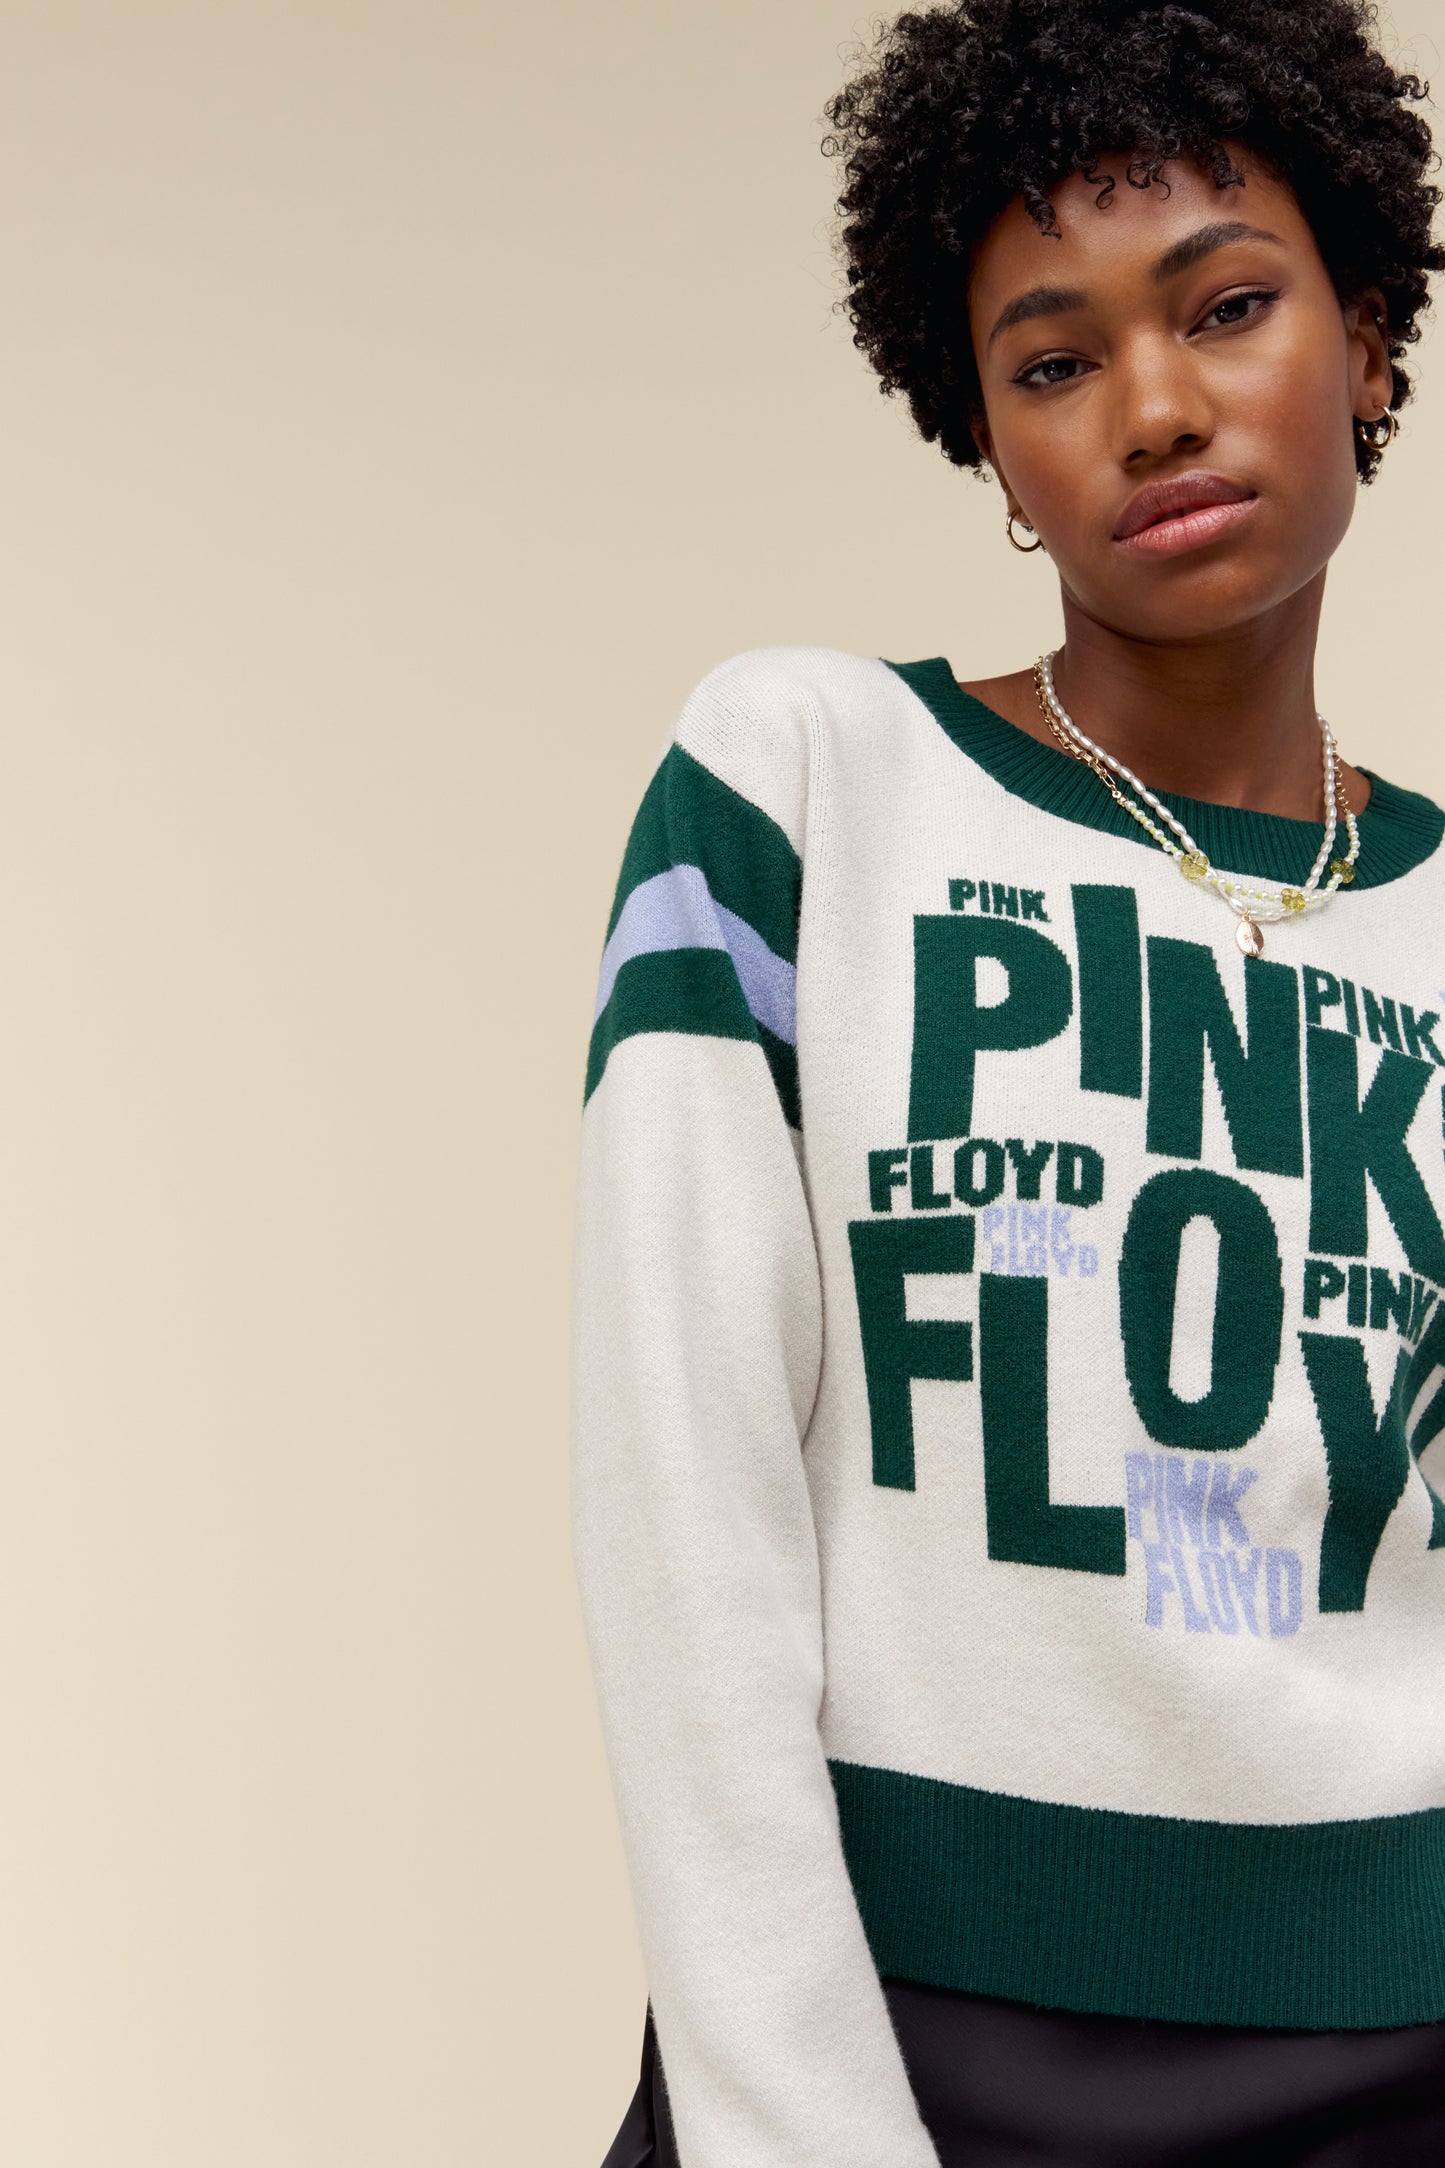 Pink Floyd Scattered Text Knit Pullover in Ivory